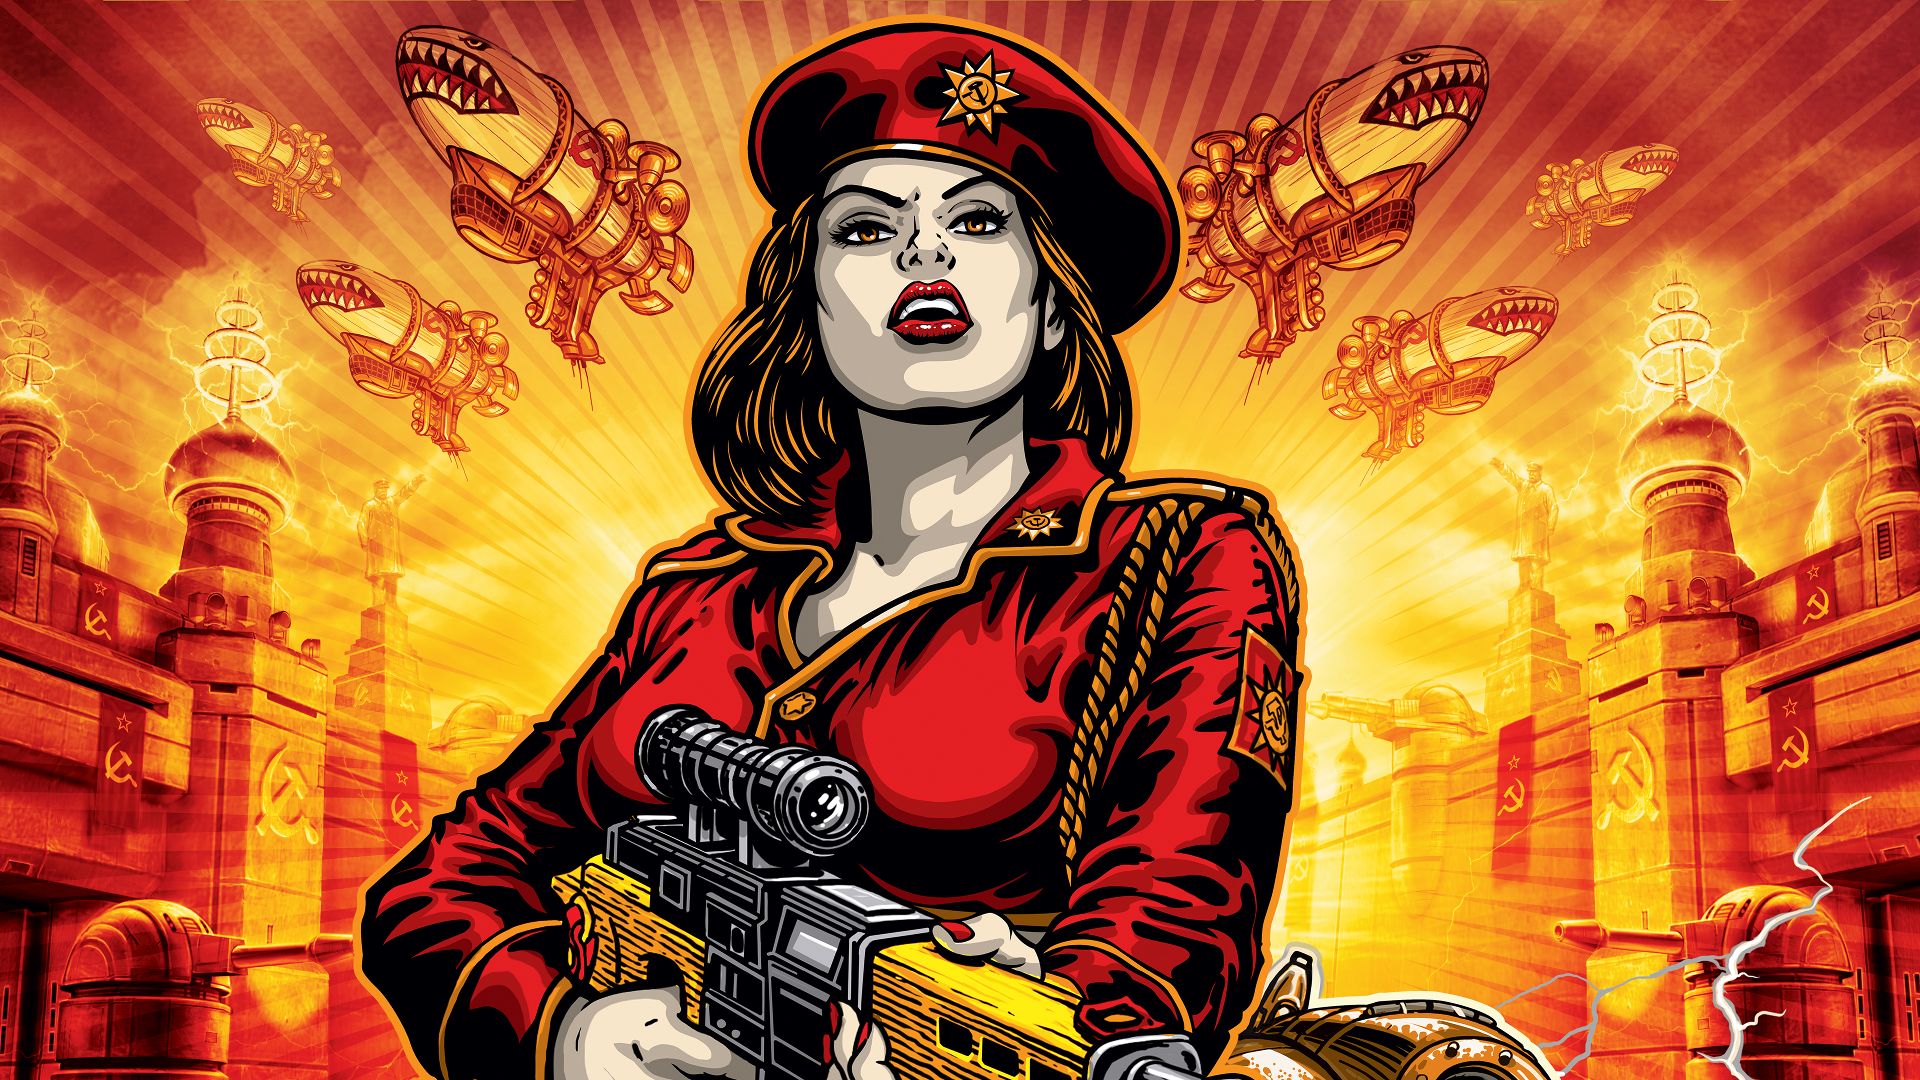 Command and conquer red alert 2 no cd crack download free